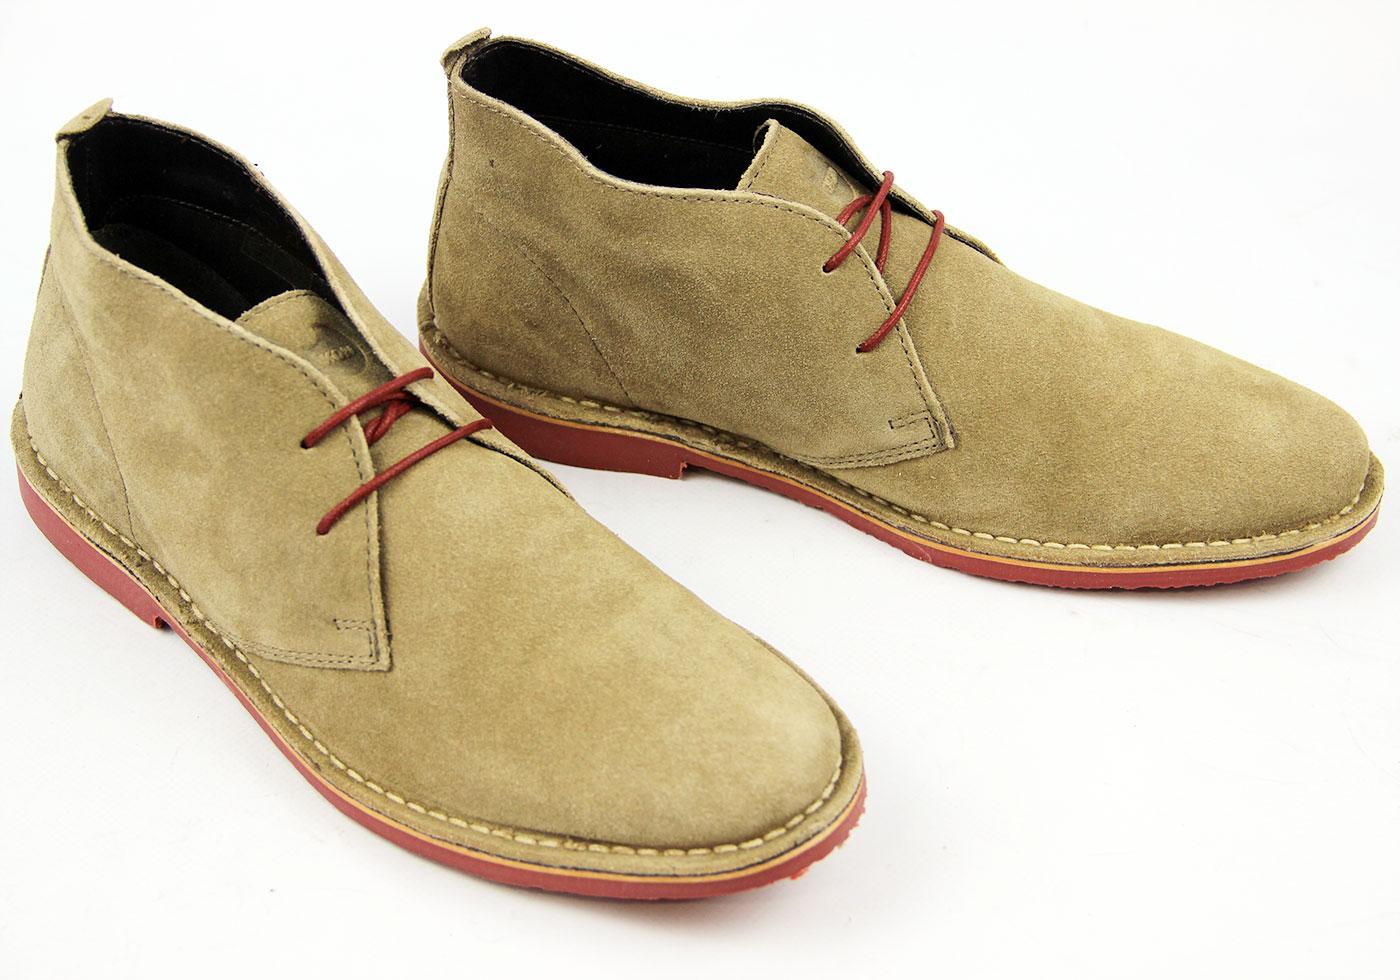 IKON A.K. Retro Sixties Mod Suede Desert Boots Taupe